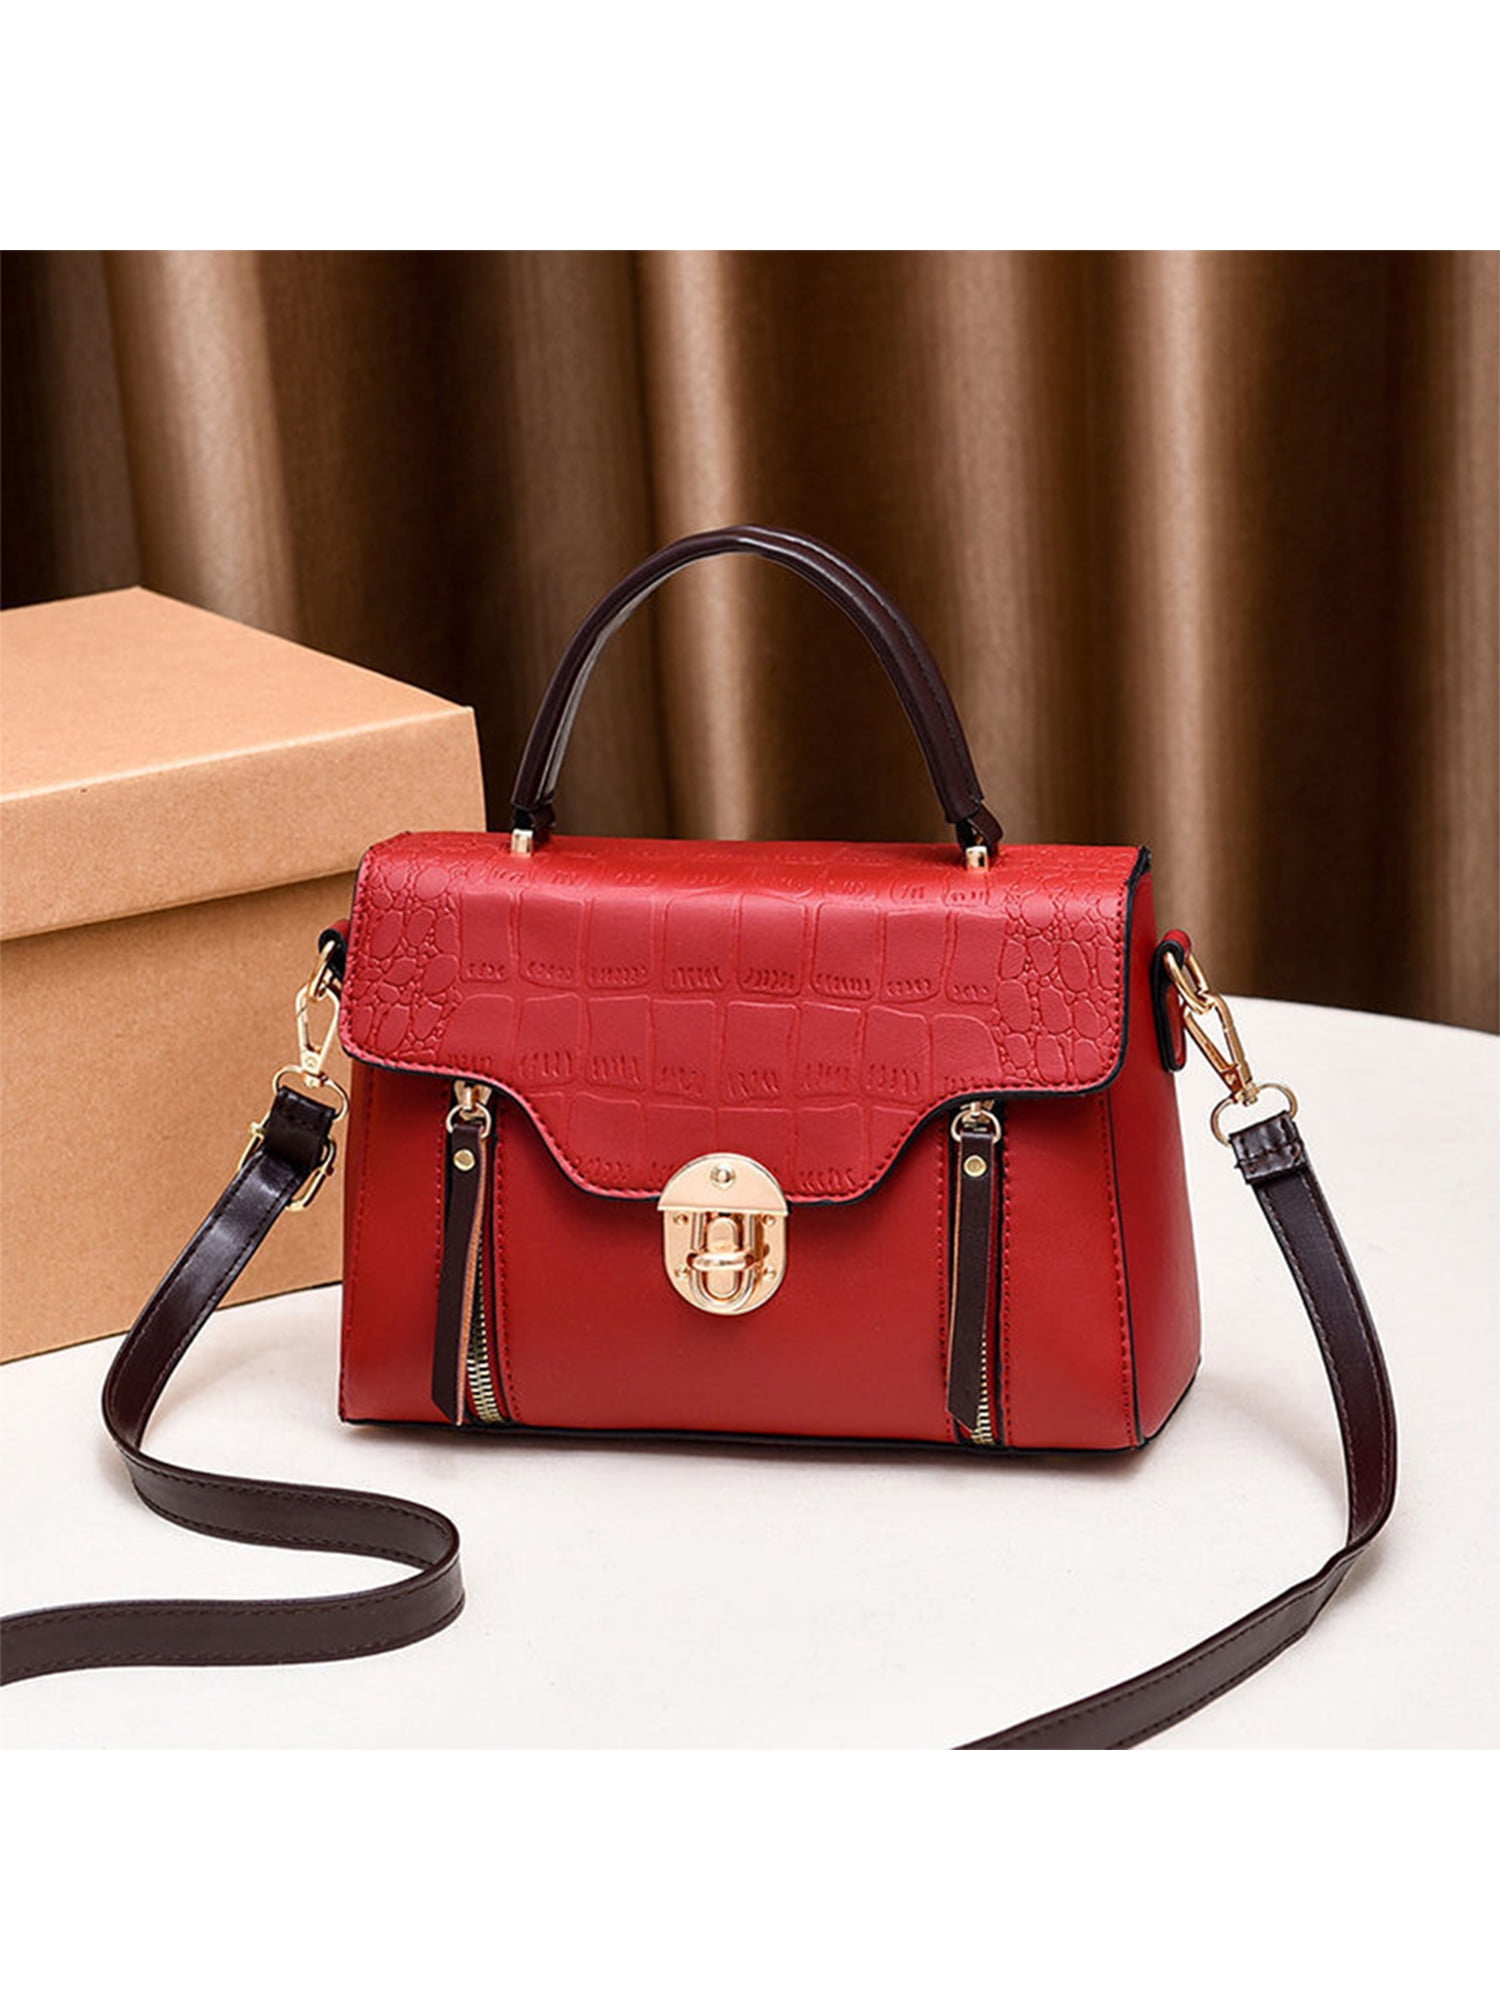 Small Size Red Croc-effect Leather Handbags Metal Lock Satchel Bags